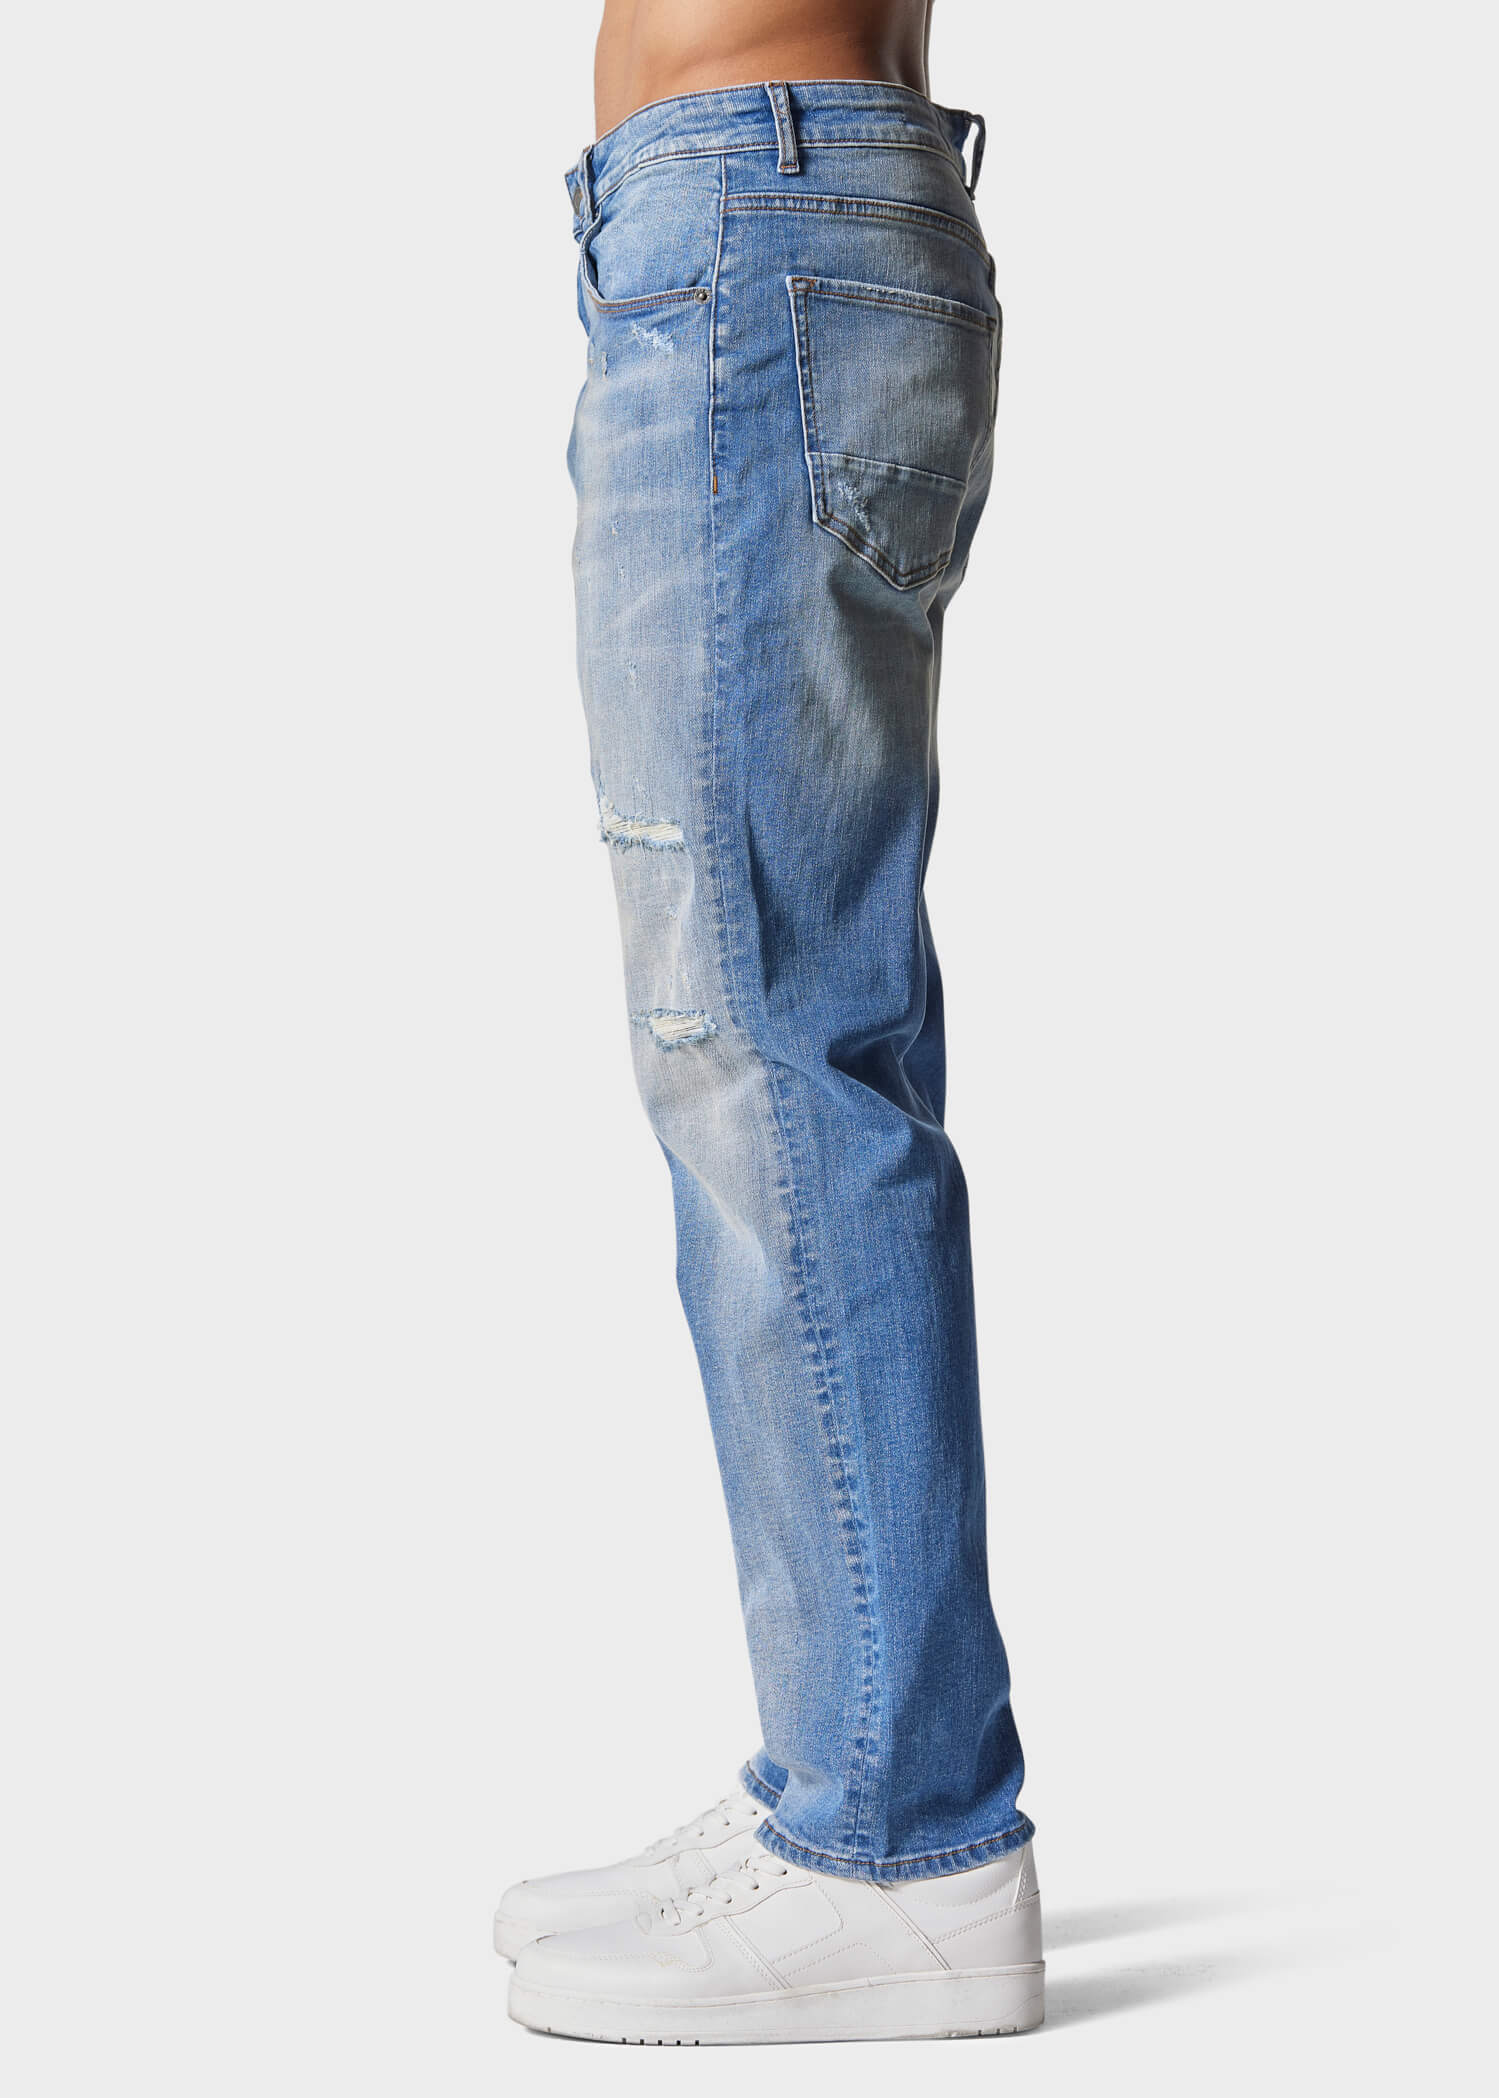 Police Natron 922 Fit Mens Jeans | 883 Police